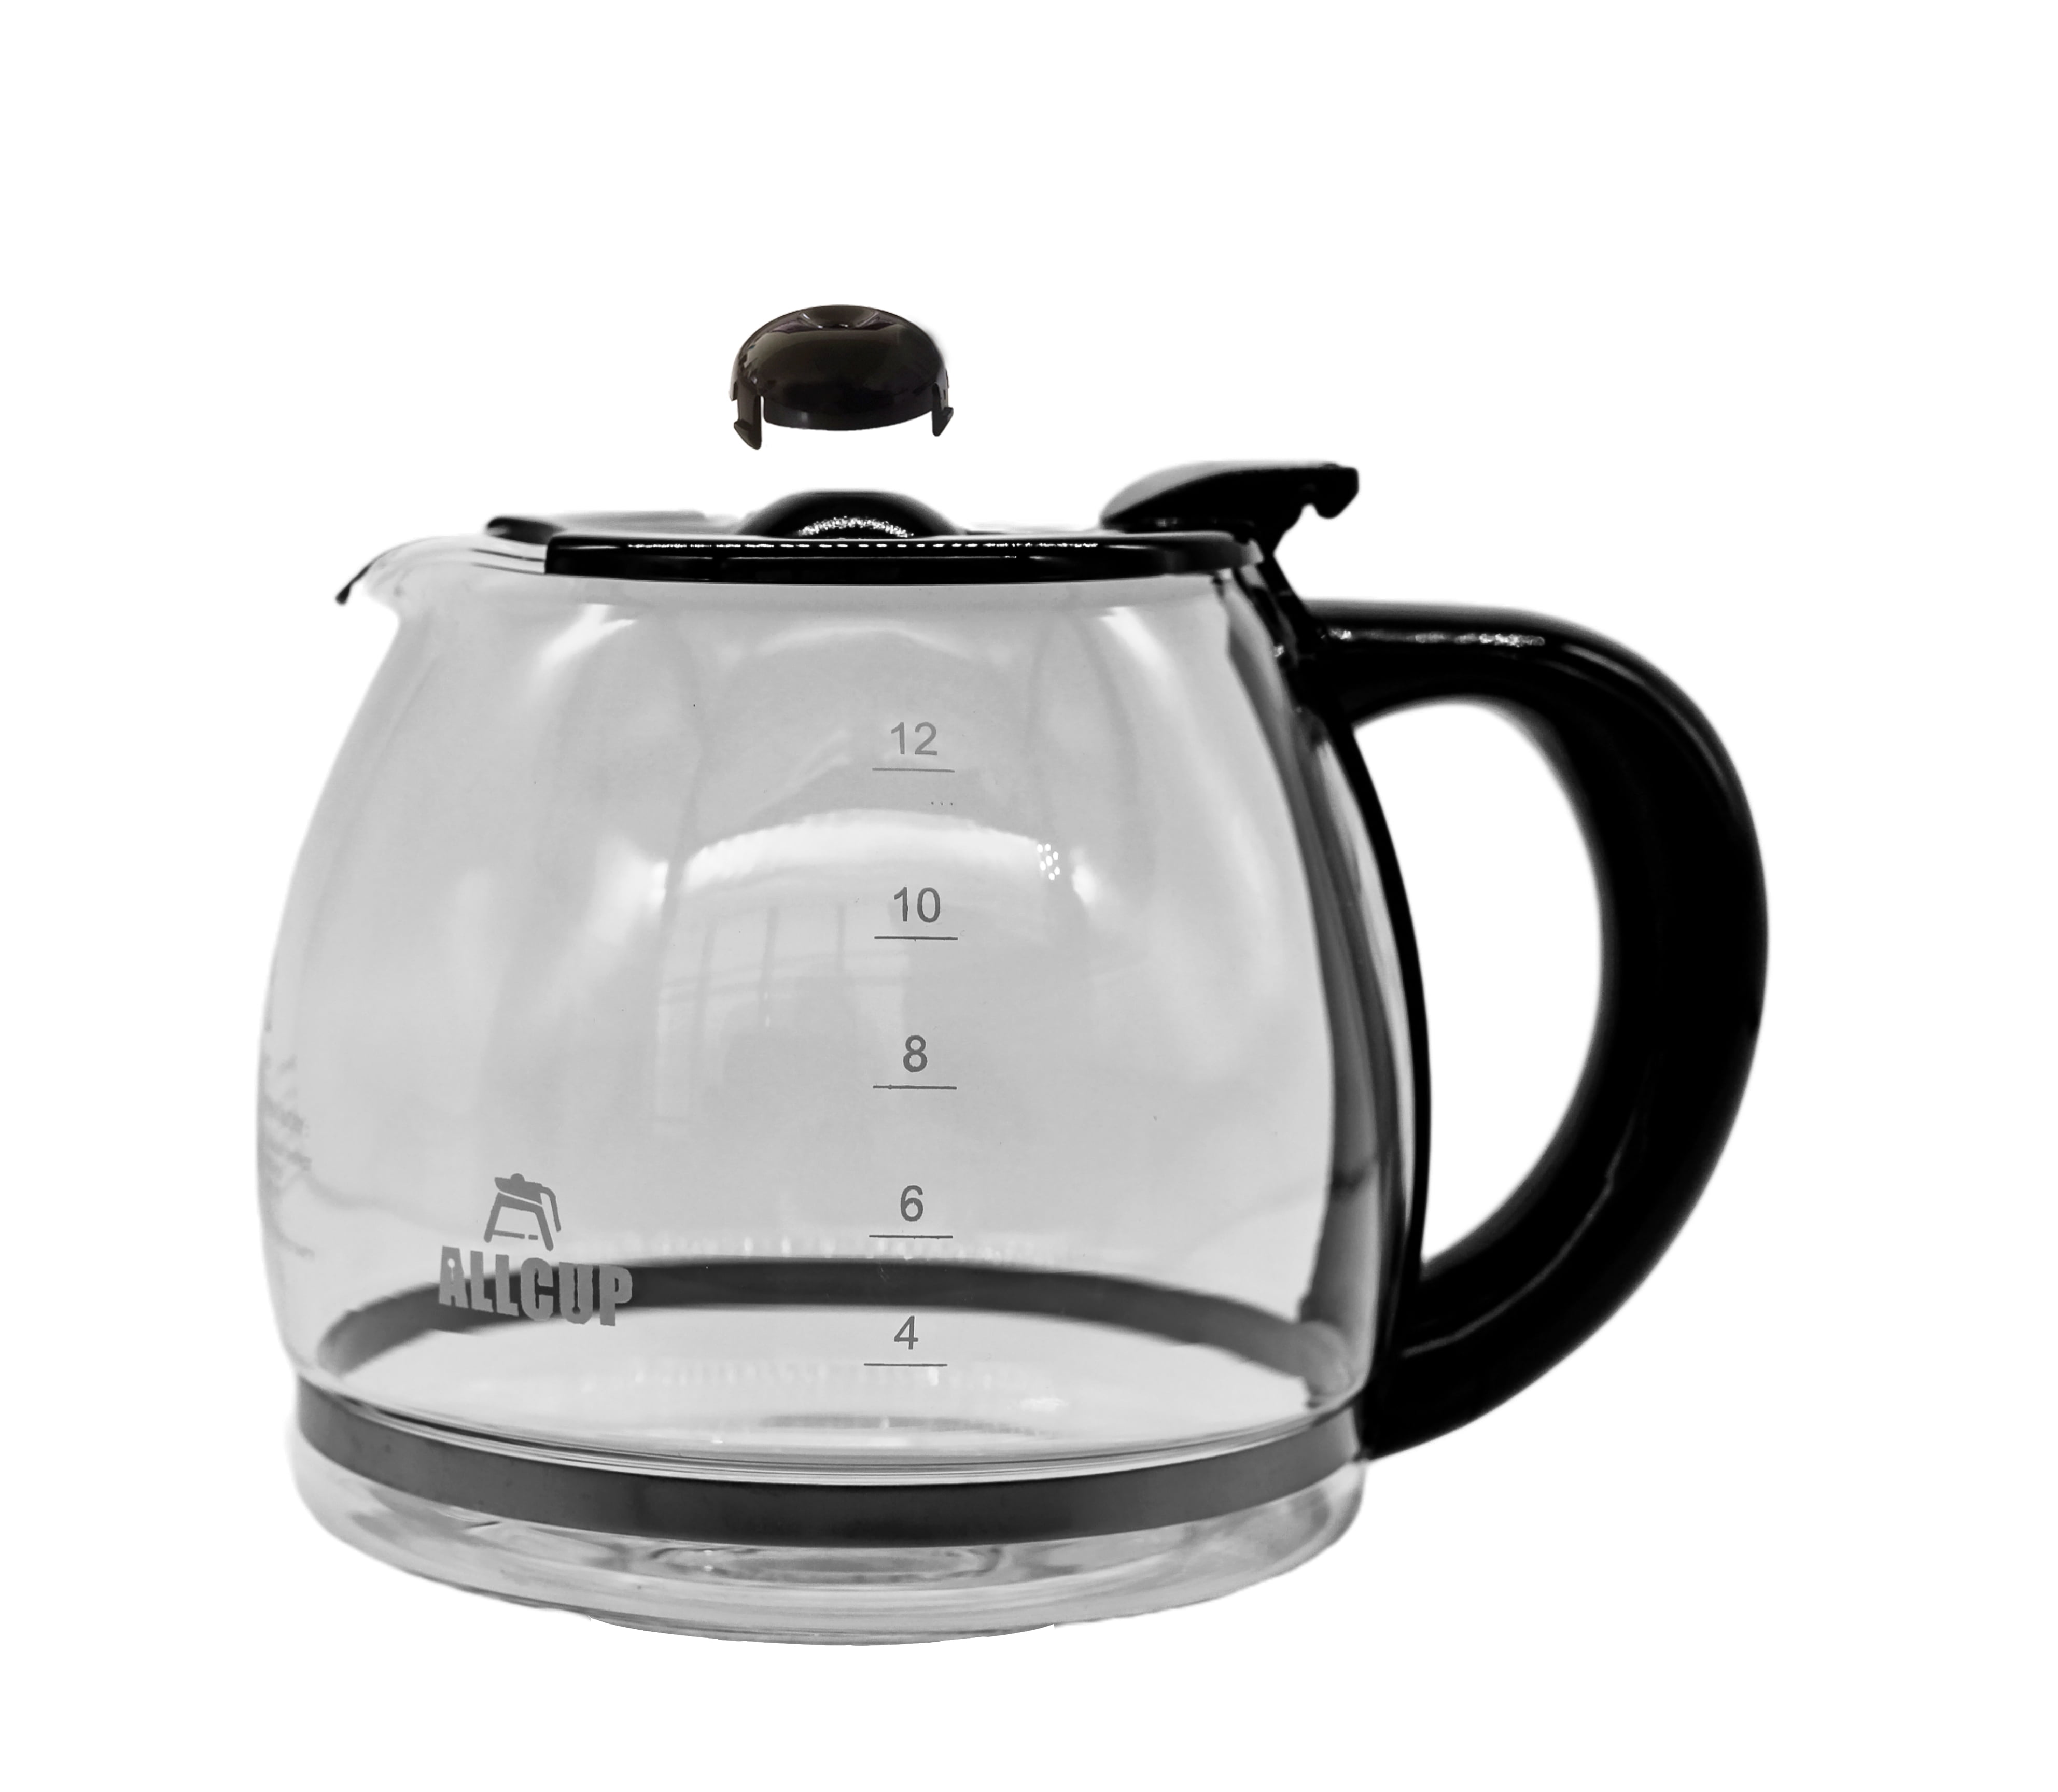 Replacement Carafe for K-Duo™ Single Serve & Carafe Coffee Maker